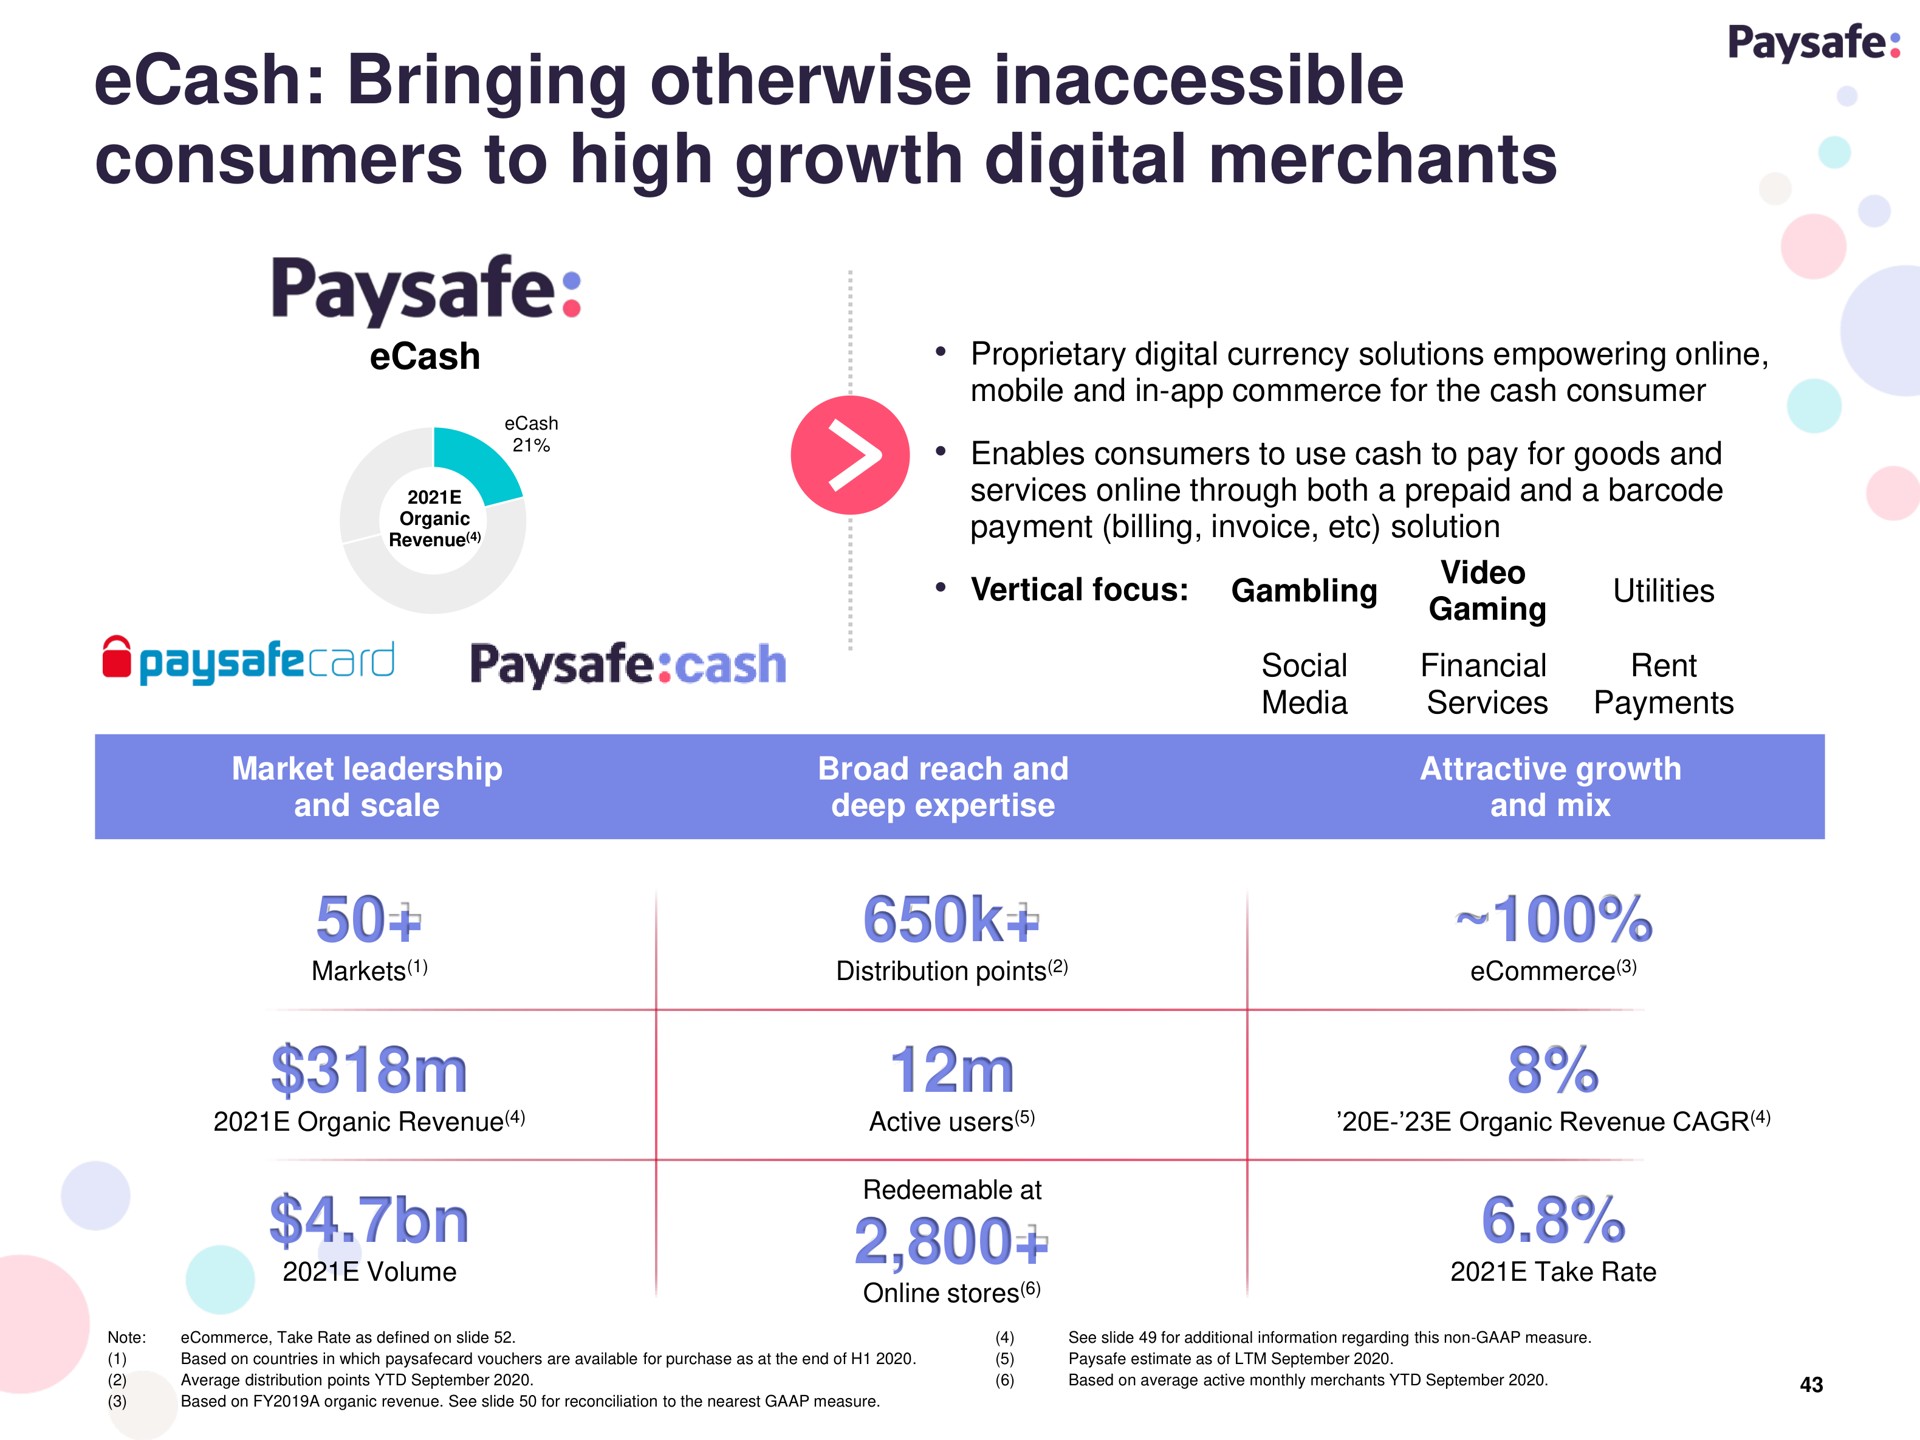 bringing otherwise inaccessible consumers to high growth digital merchants | Paysafe